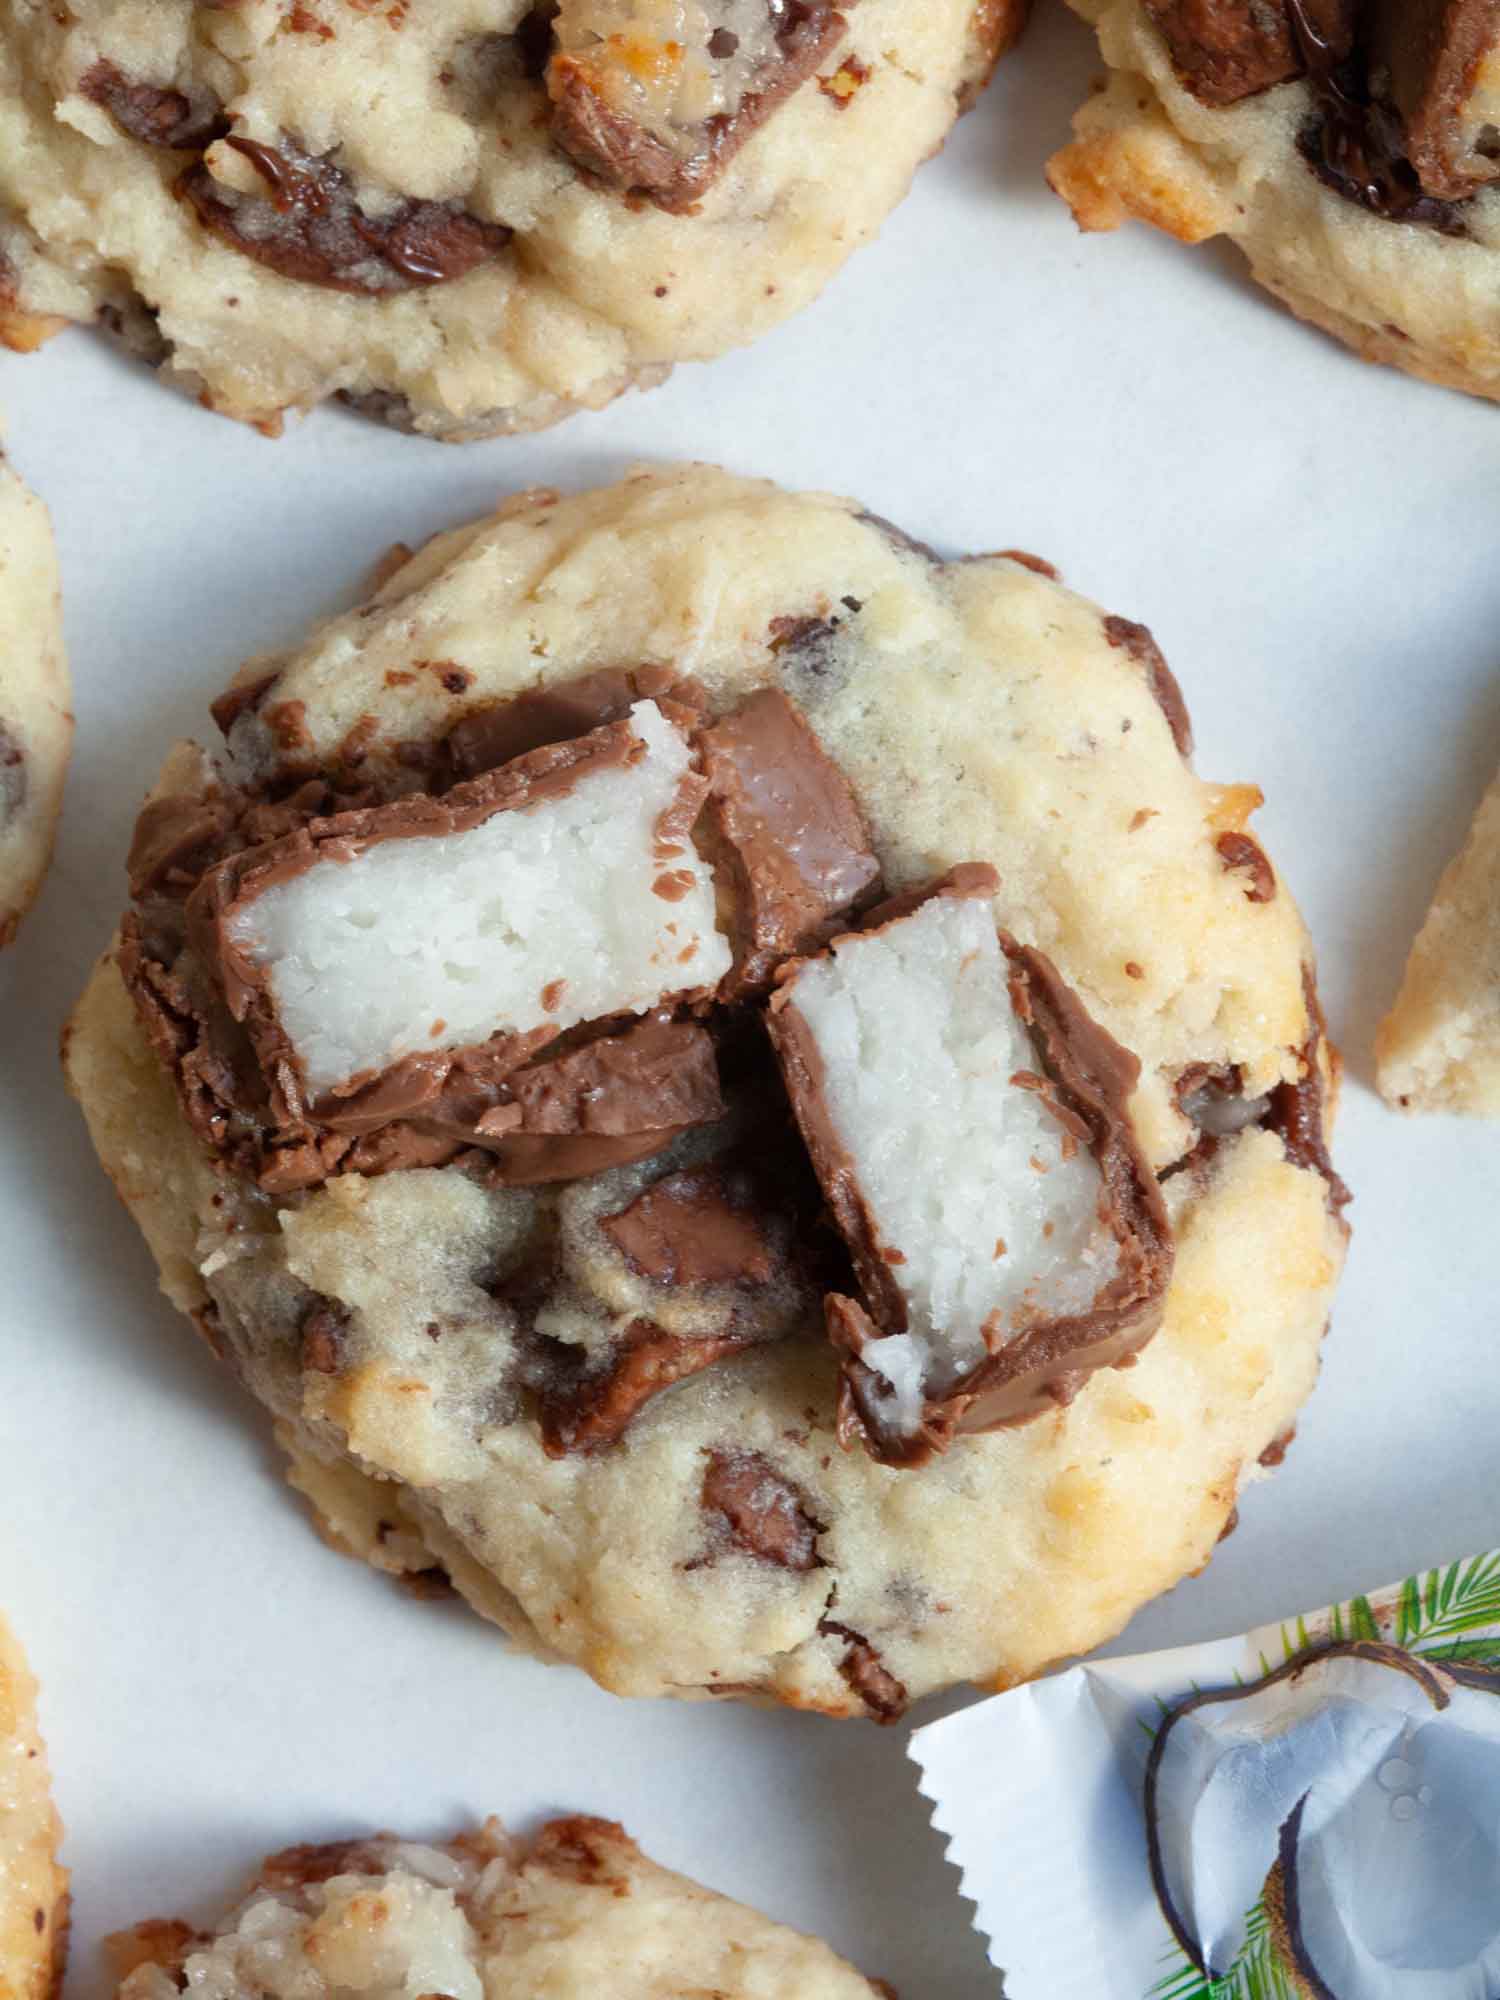 Bounty cookies-coconut and chocolate cookies